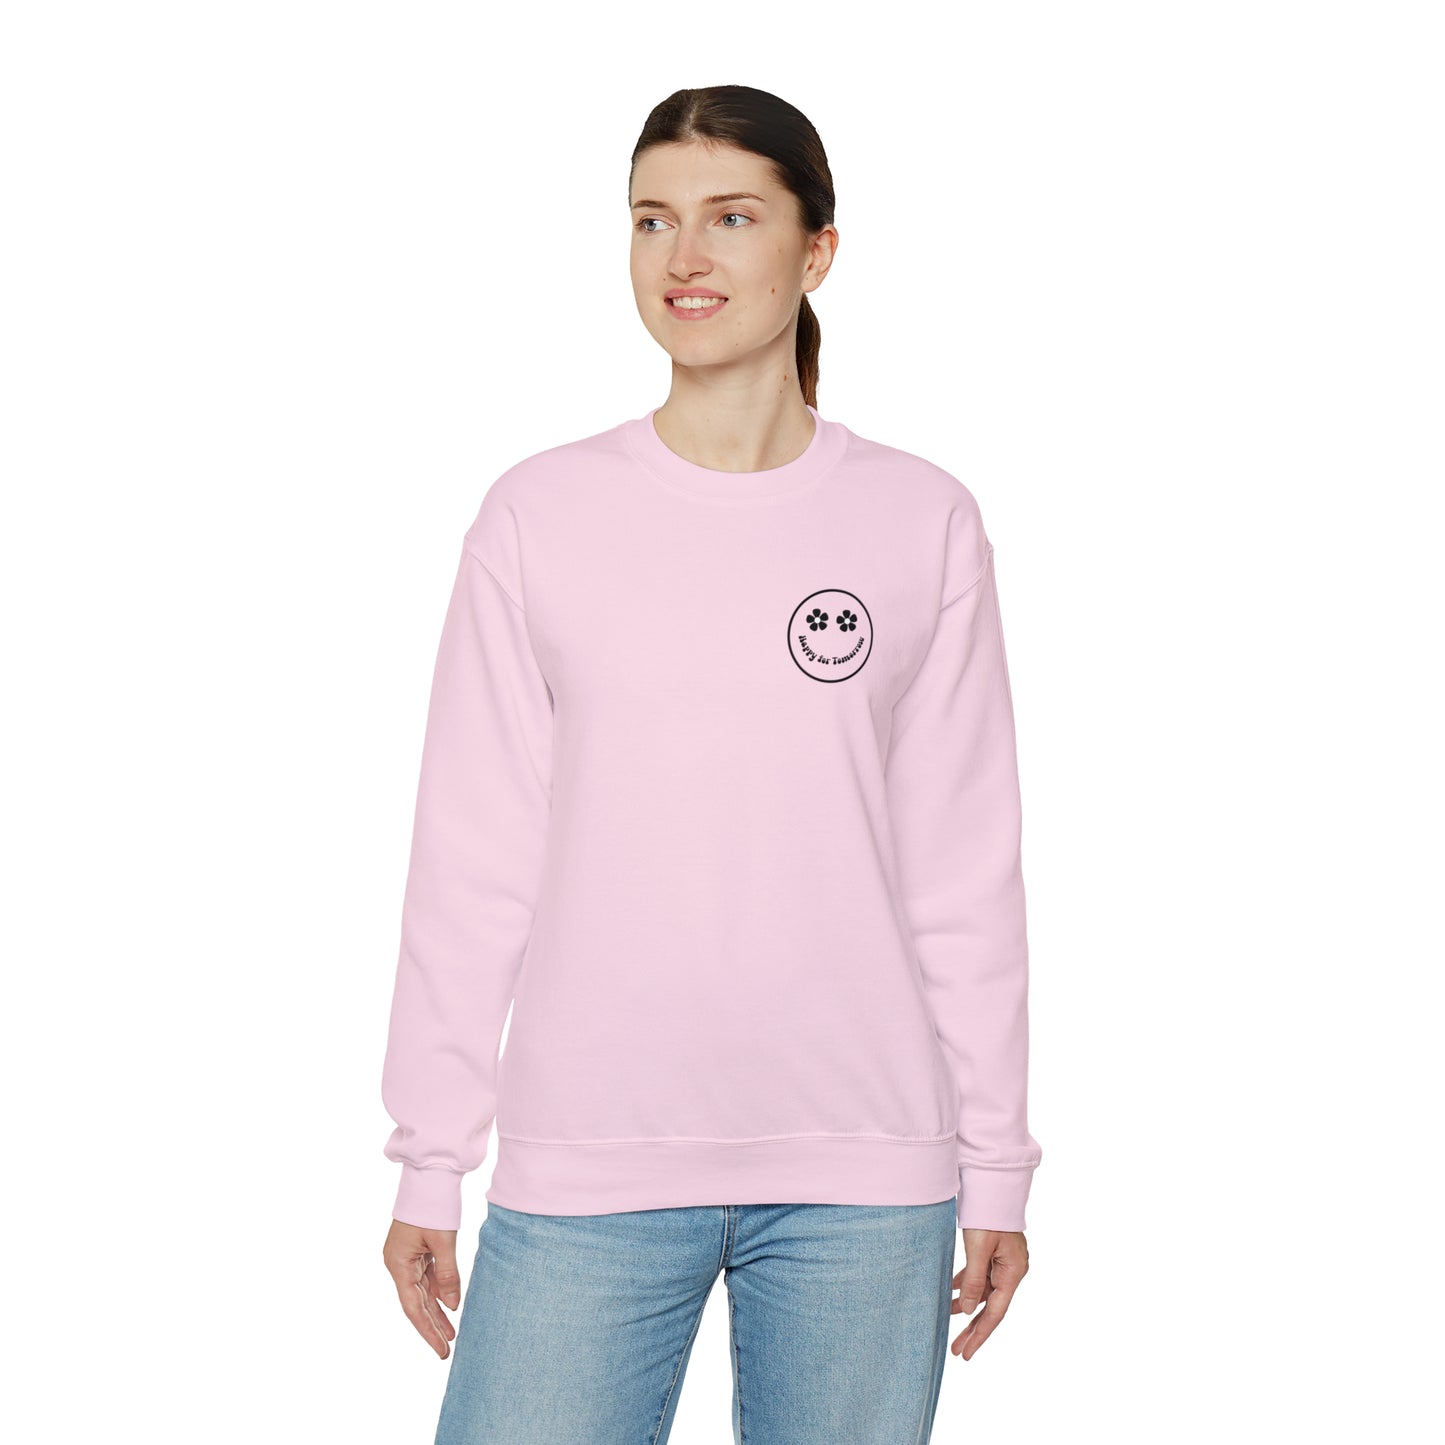 You Are Doing Great Light Pink Colored Crew Neck Sweatshirt